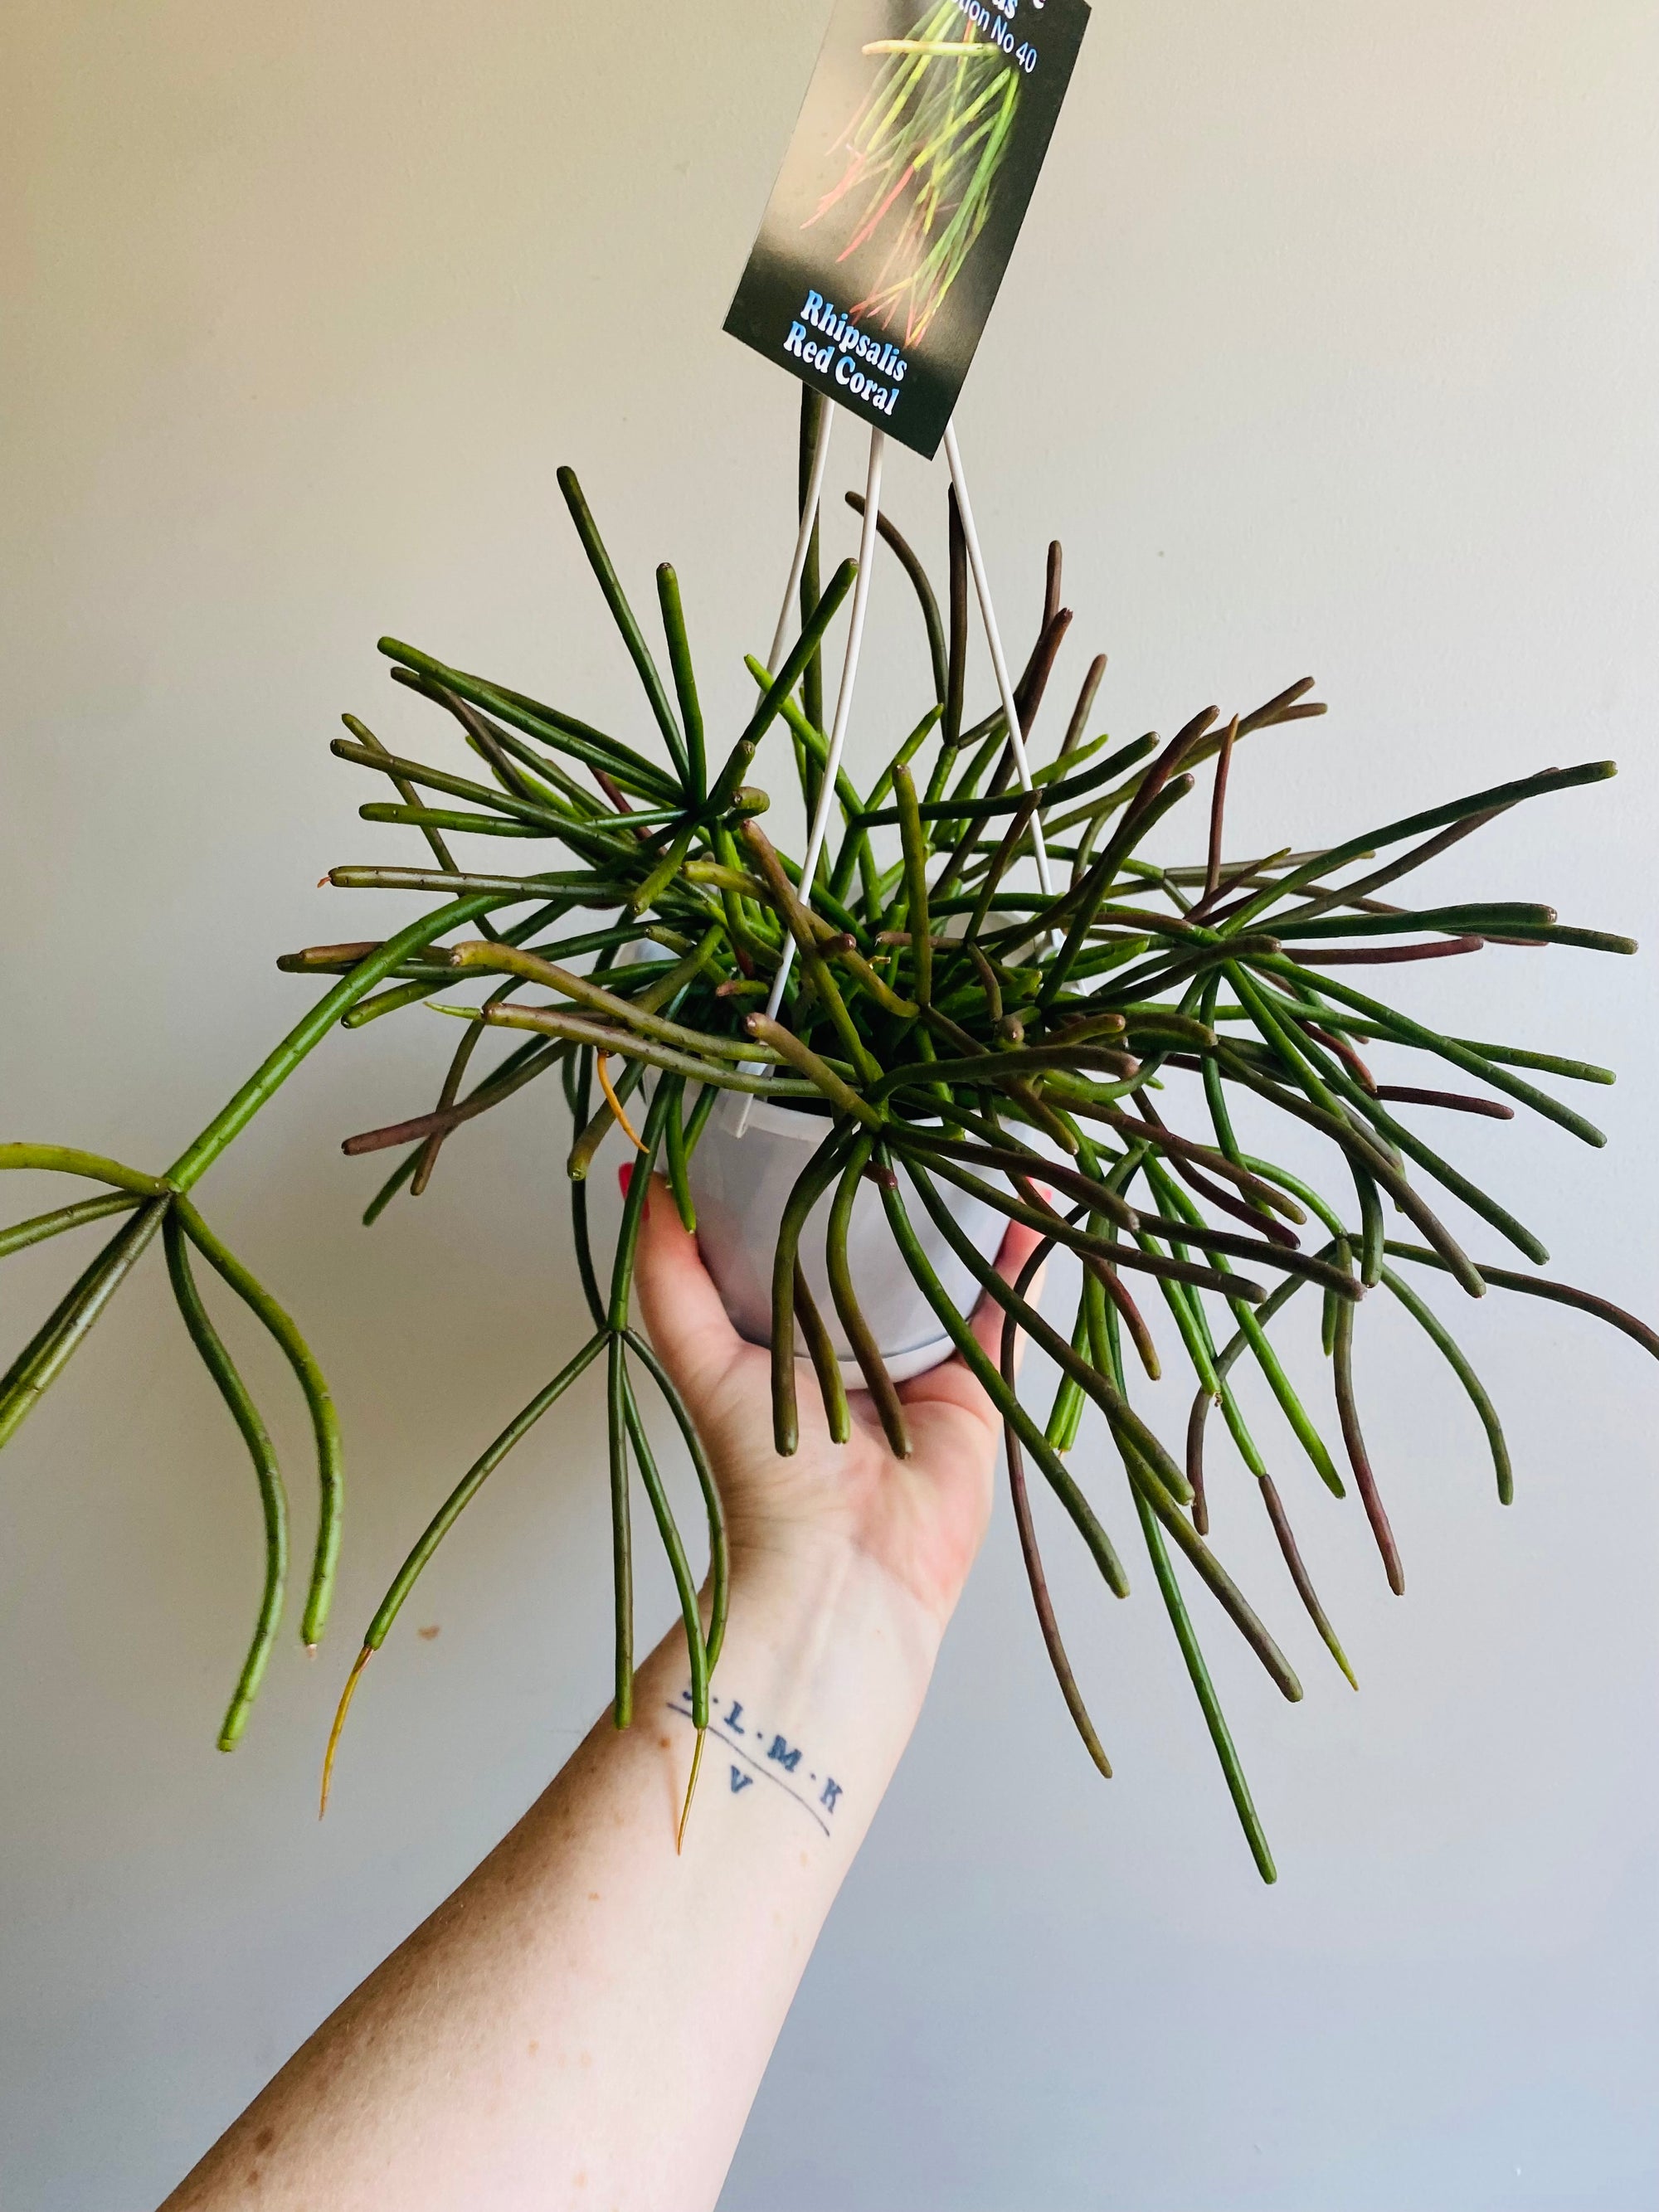 Rhipsalis Red Coral - Mistletoe Cactus Collection No. 40